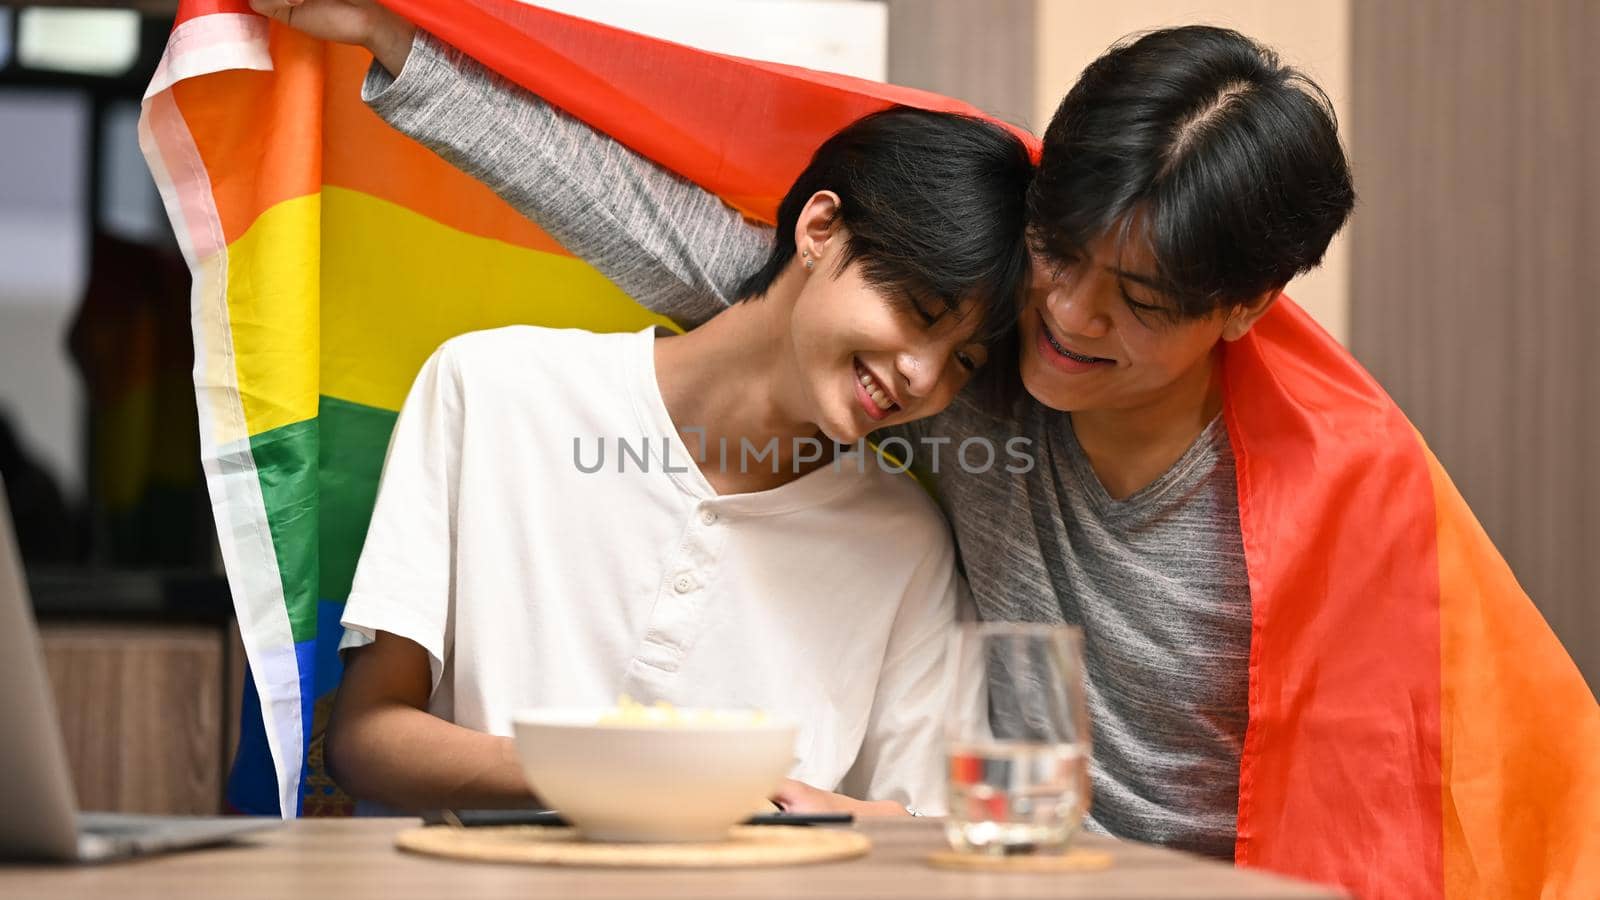 Happy young homosexual couple embracing under LGBTQ pride flag. Concept of sexual freedom and equal rights for LGBT community.